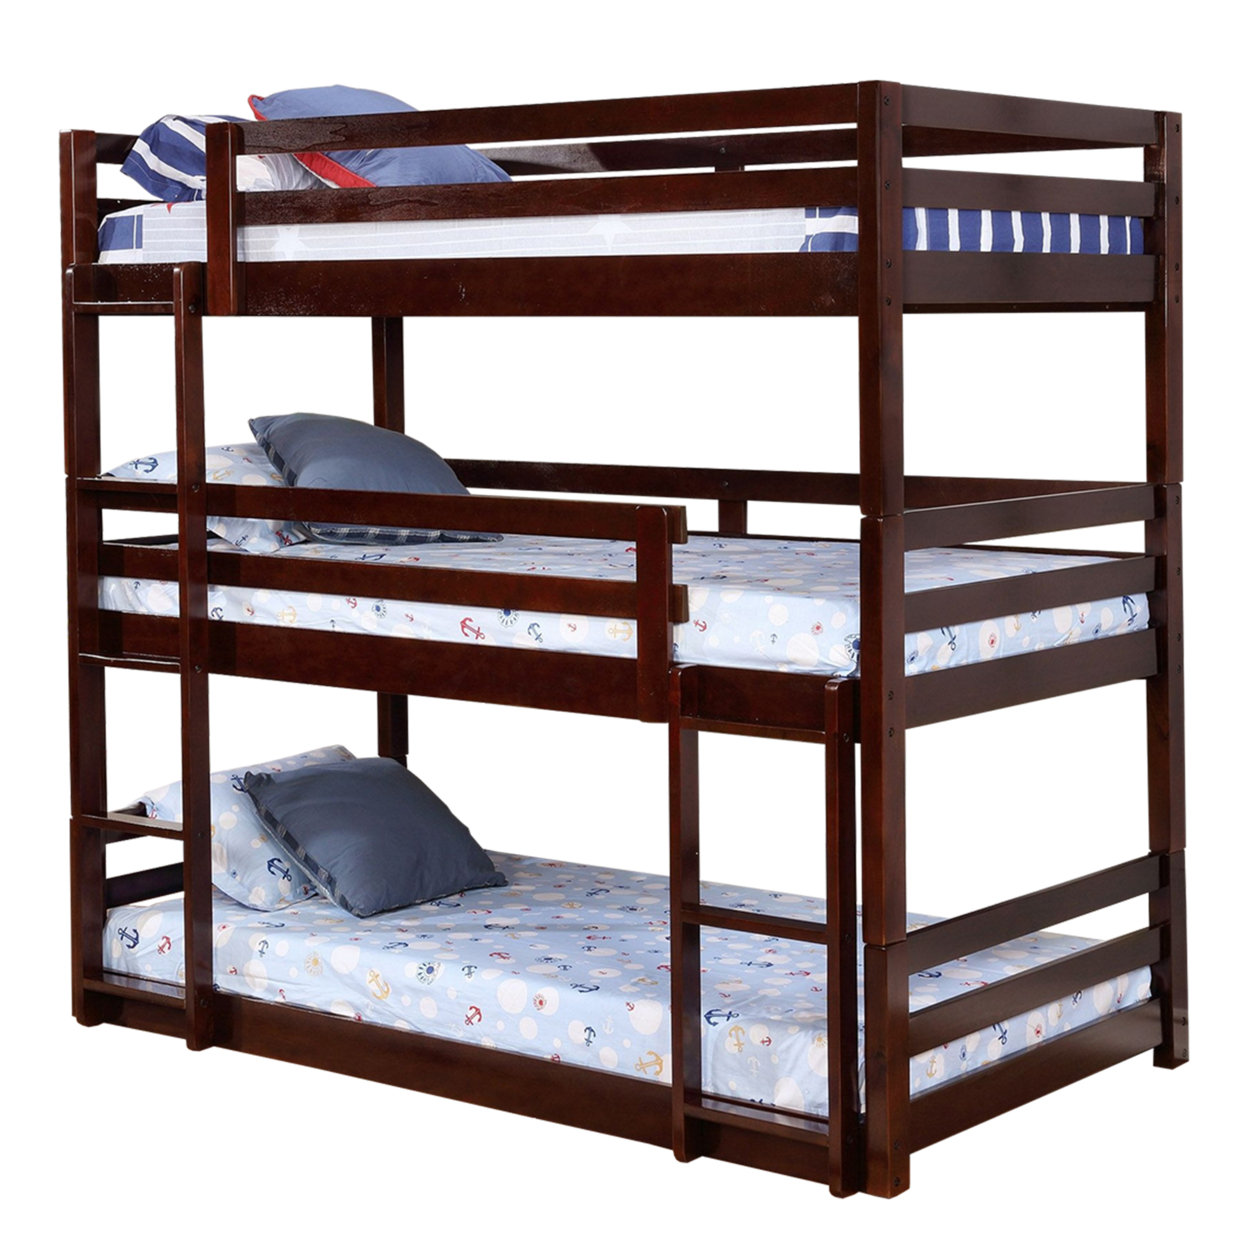 3 Tier Design Wooden Twin Size Bunk Bed With Attached Guardrails, Brown- Saltoro Sherpi